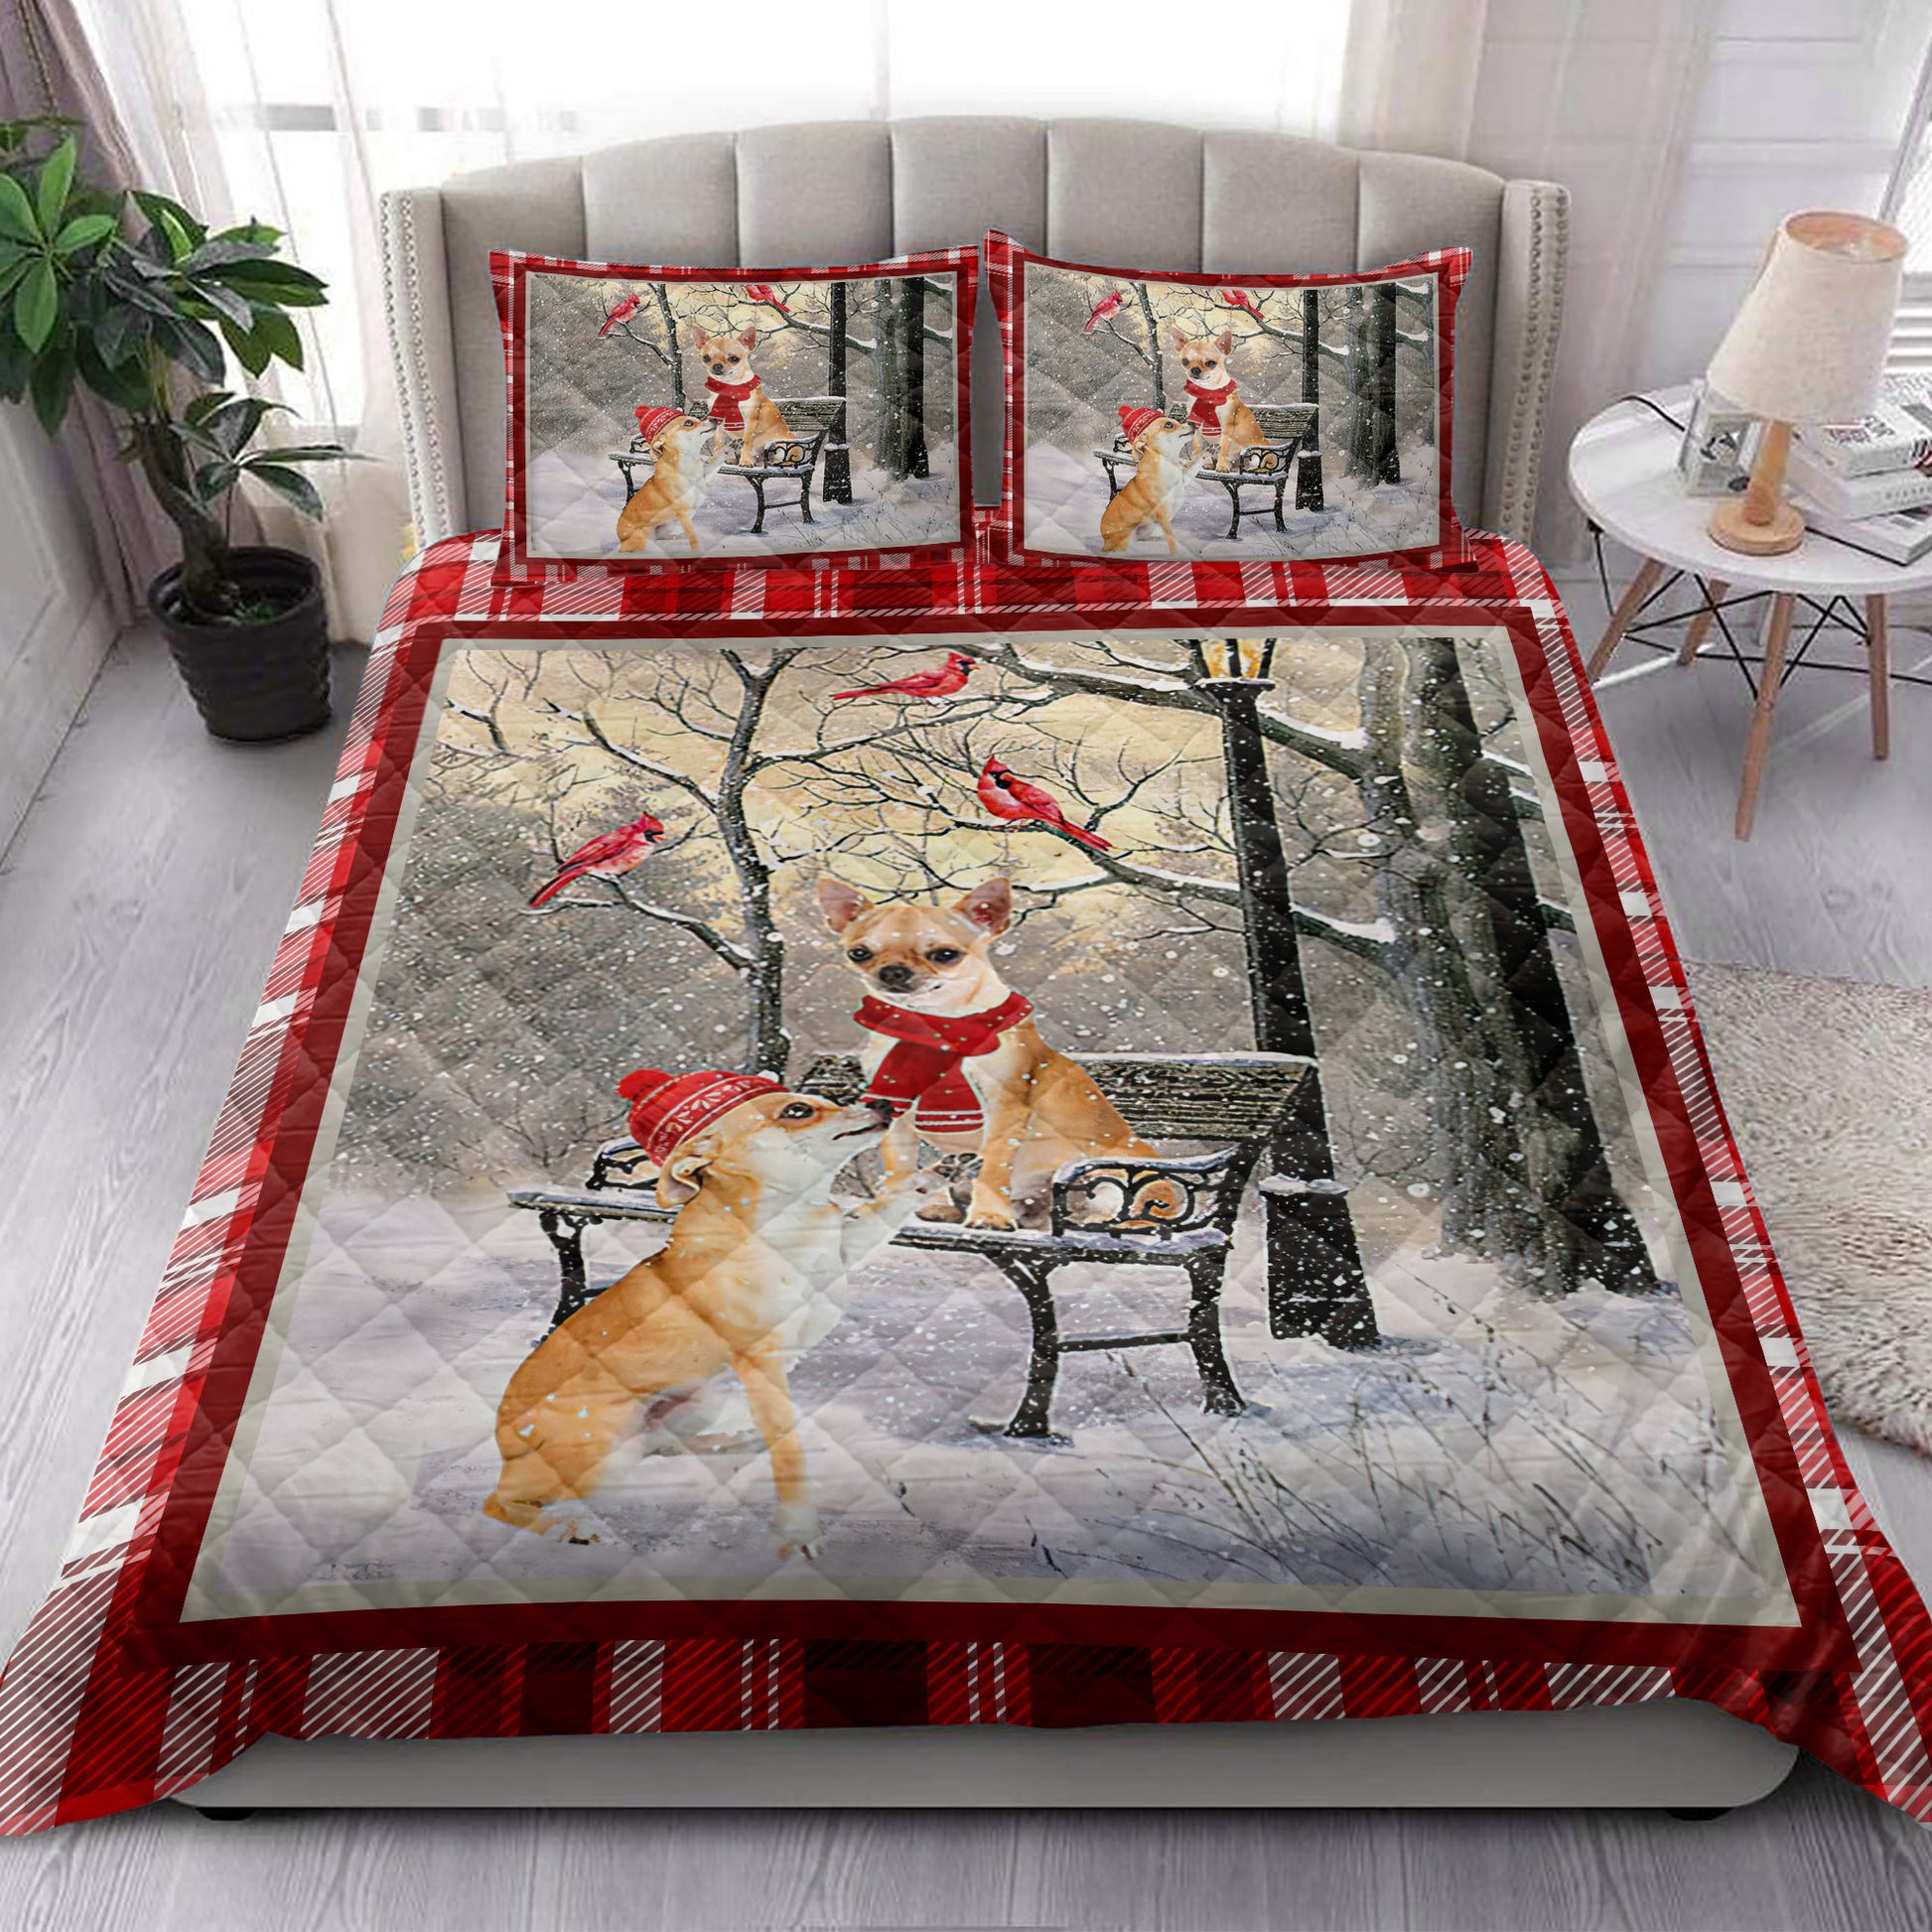 Ohaprints-Quilt-Bed-Set-Pillowcase-Chihuahua-Hello-Christmas-Snowflake-Winter-Park-Cardinal-Holiday-Blanket-Bedspread-Bedding-3976-King (90'' x 100'')